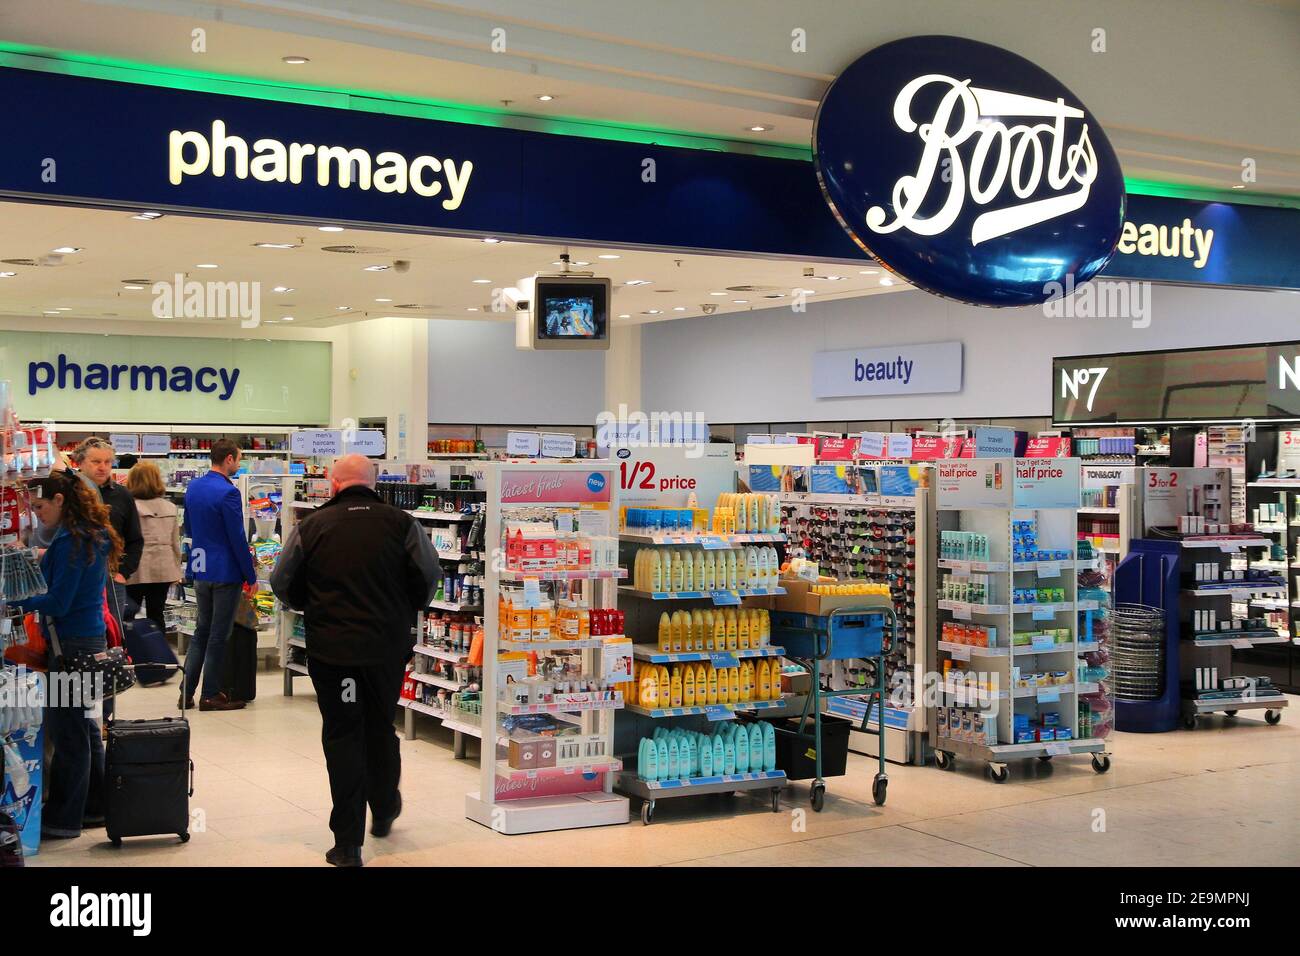 LONDON, UK - APRIL 16, 2014: People visit Boots pharmacy shop at London  Heathrow Airport. Boots is a pharmaceutical retailer brand with 2,500 shops  in Stock Photo - Alamy